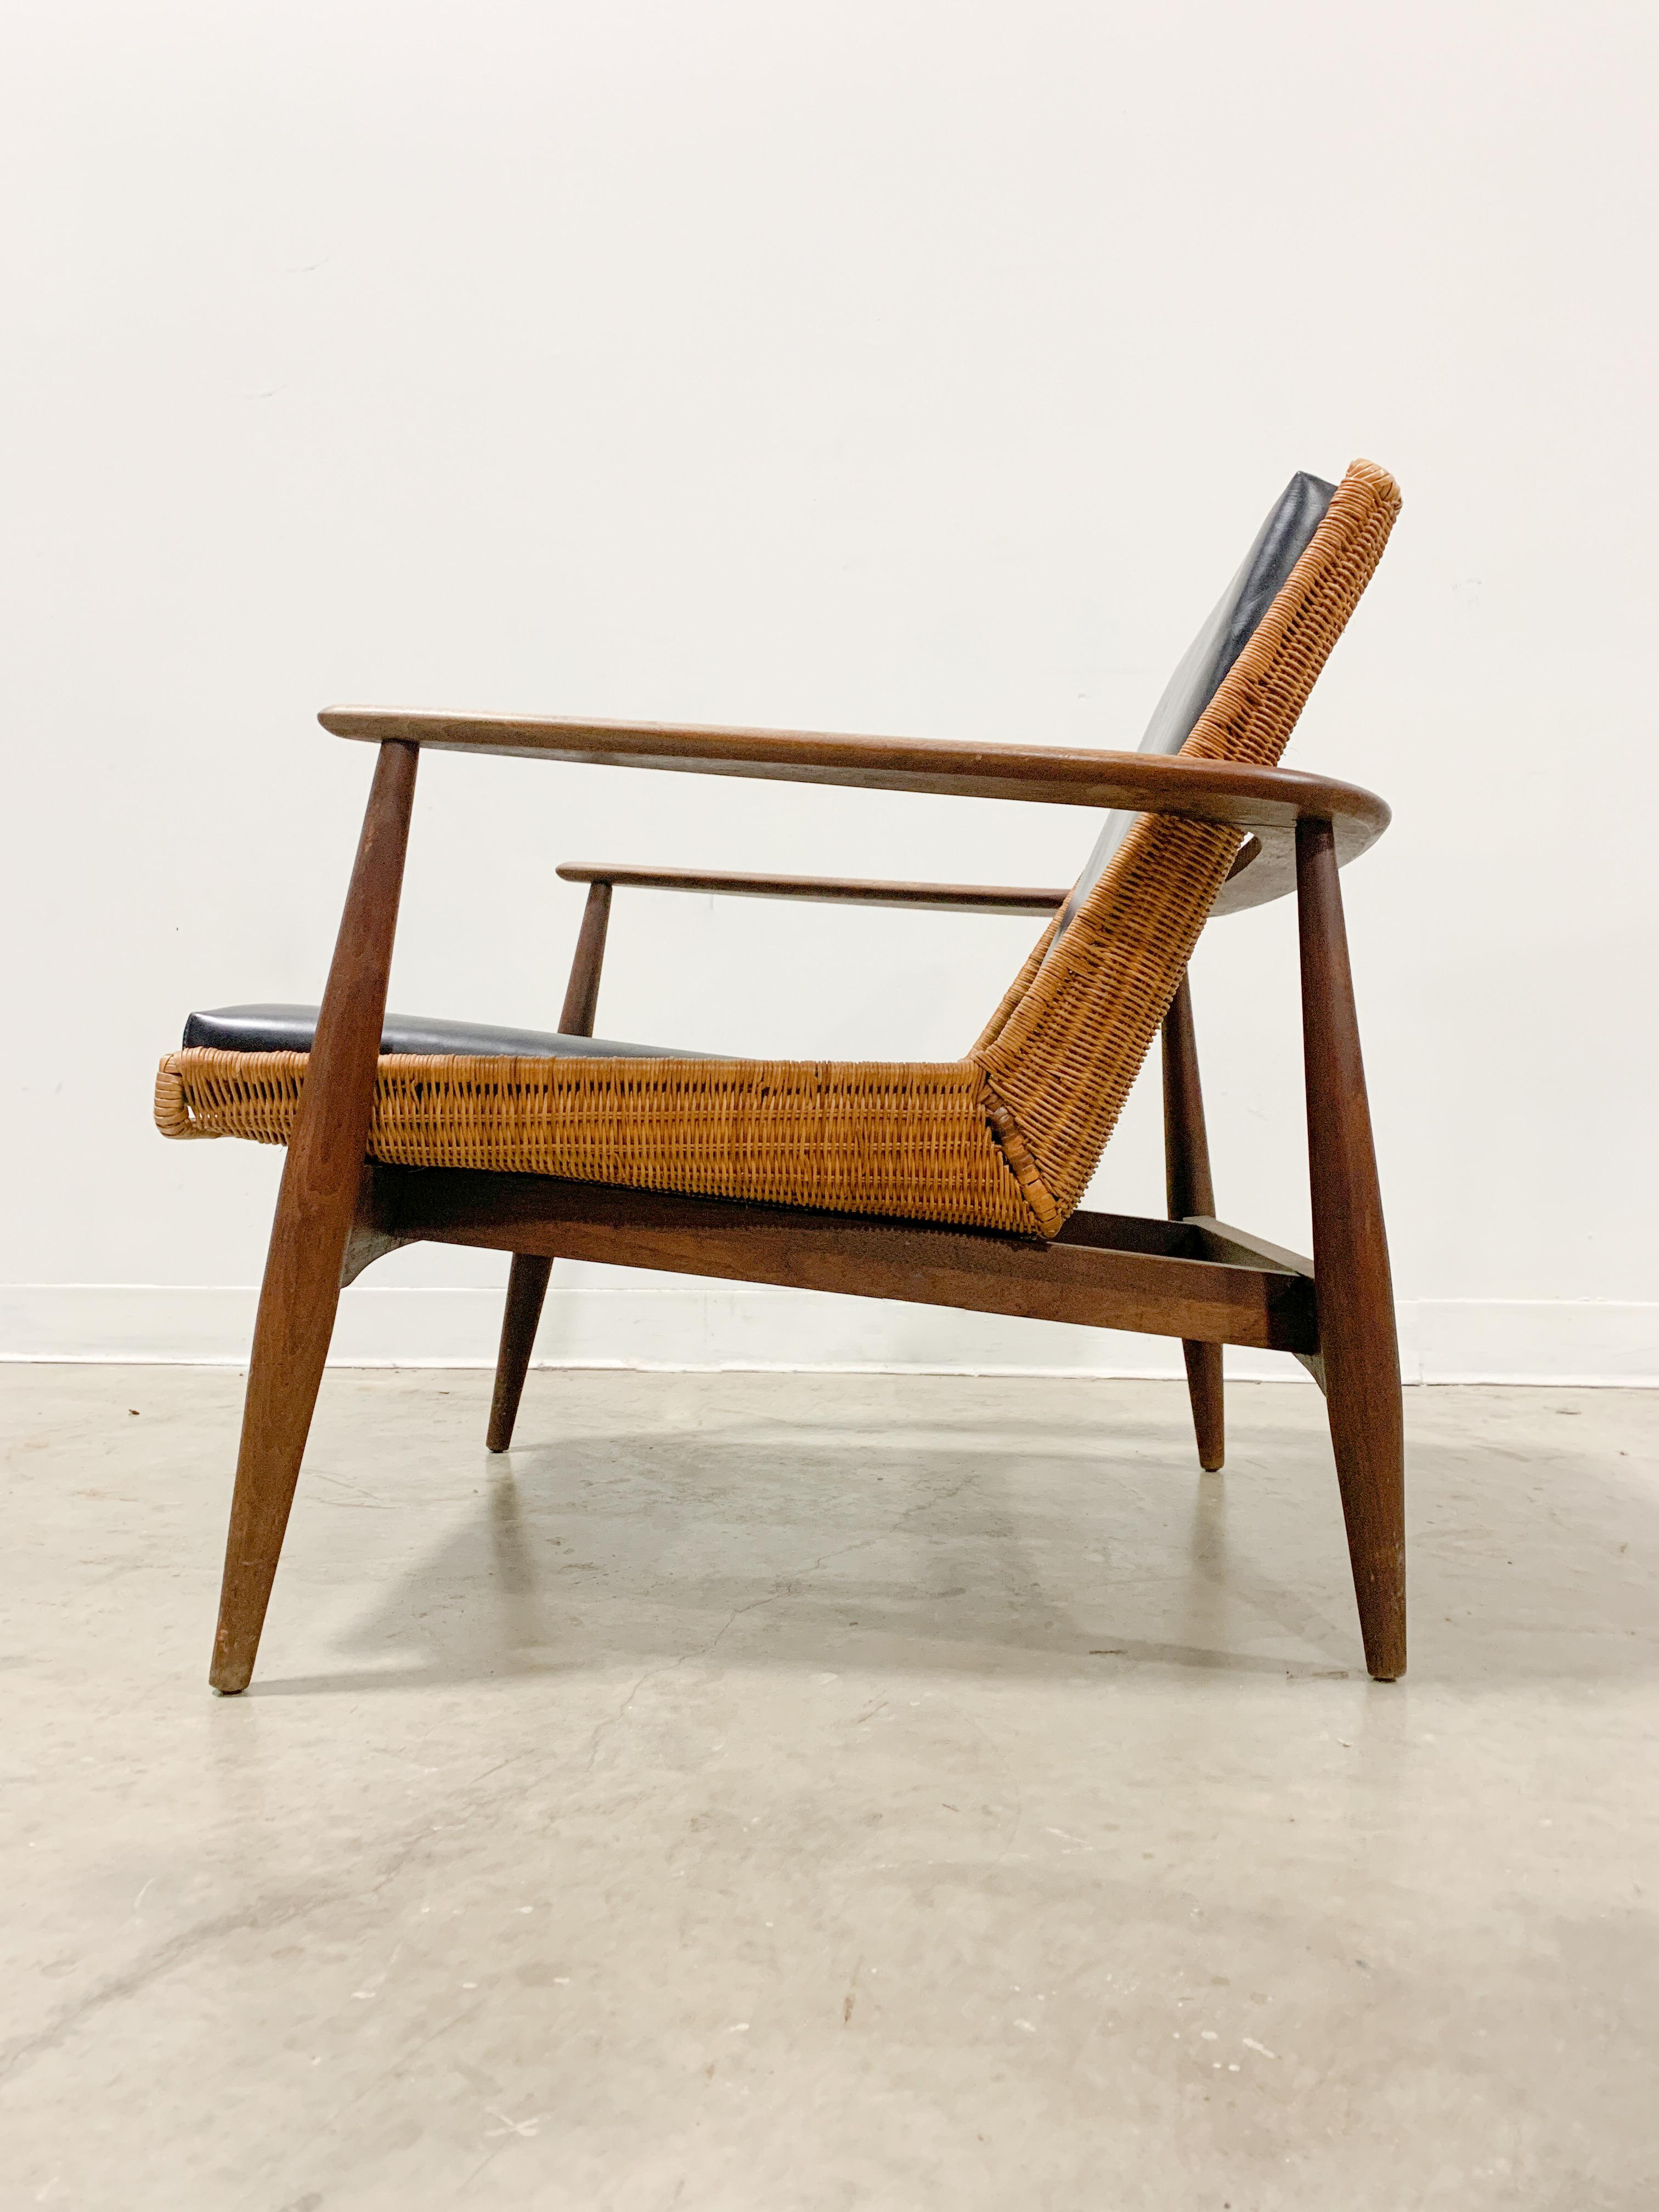 lawrence peabody chair